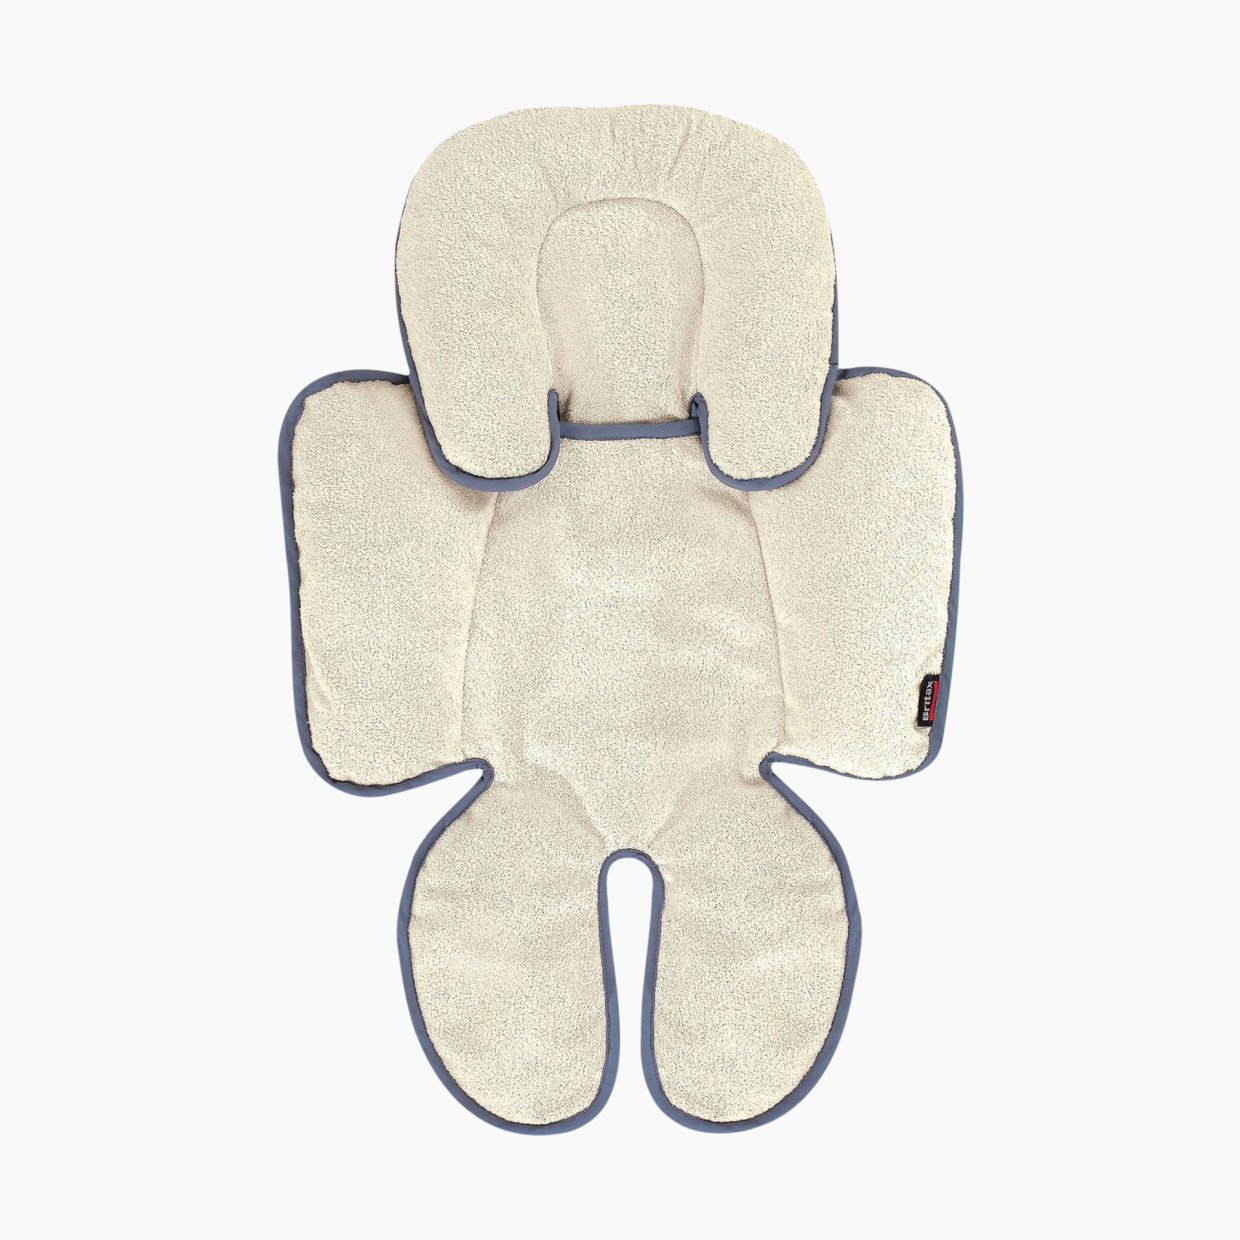 Britax Head and Body Support Pillow.